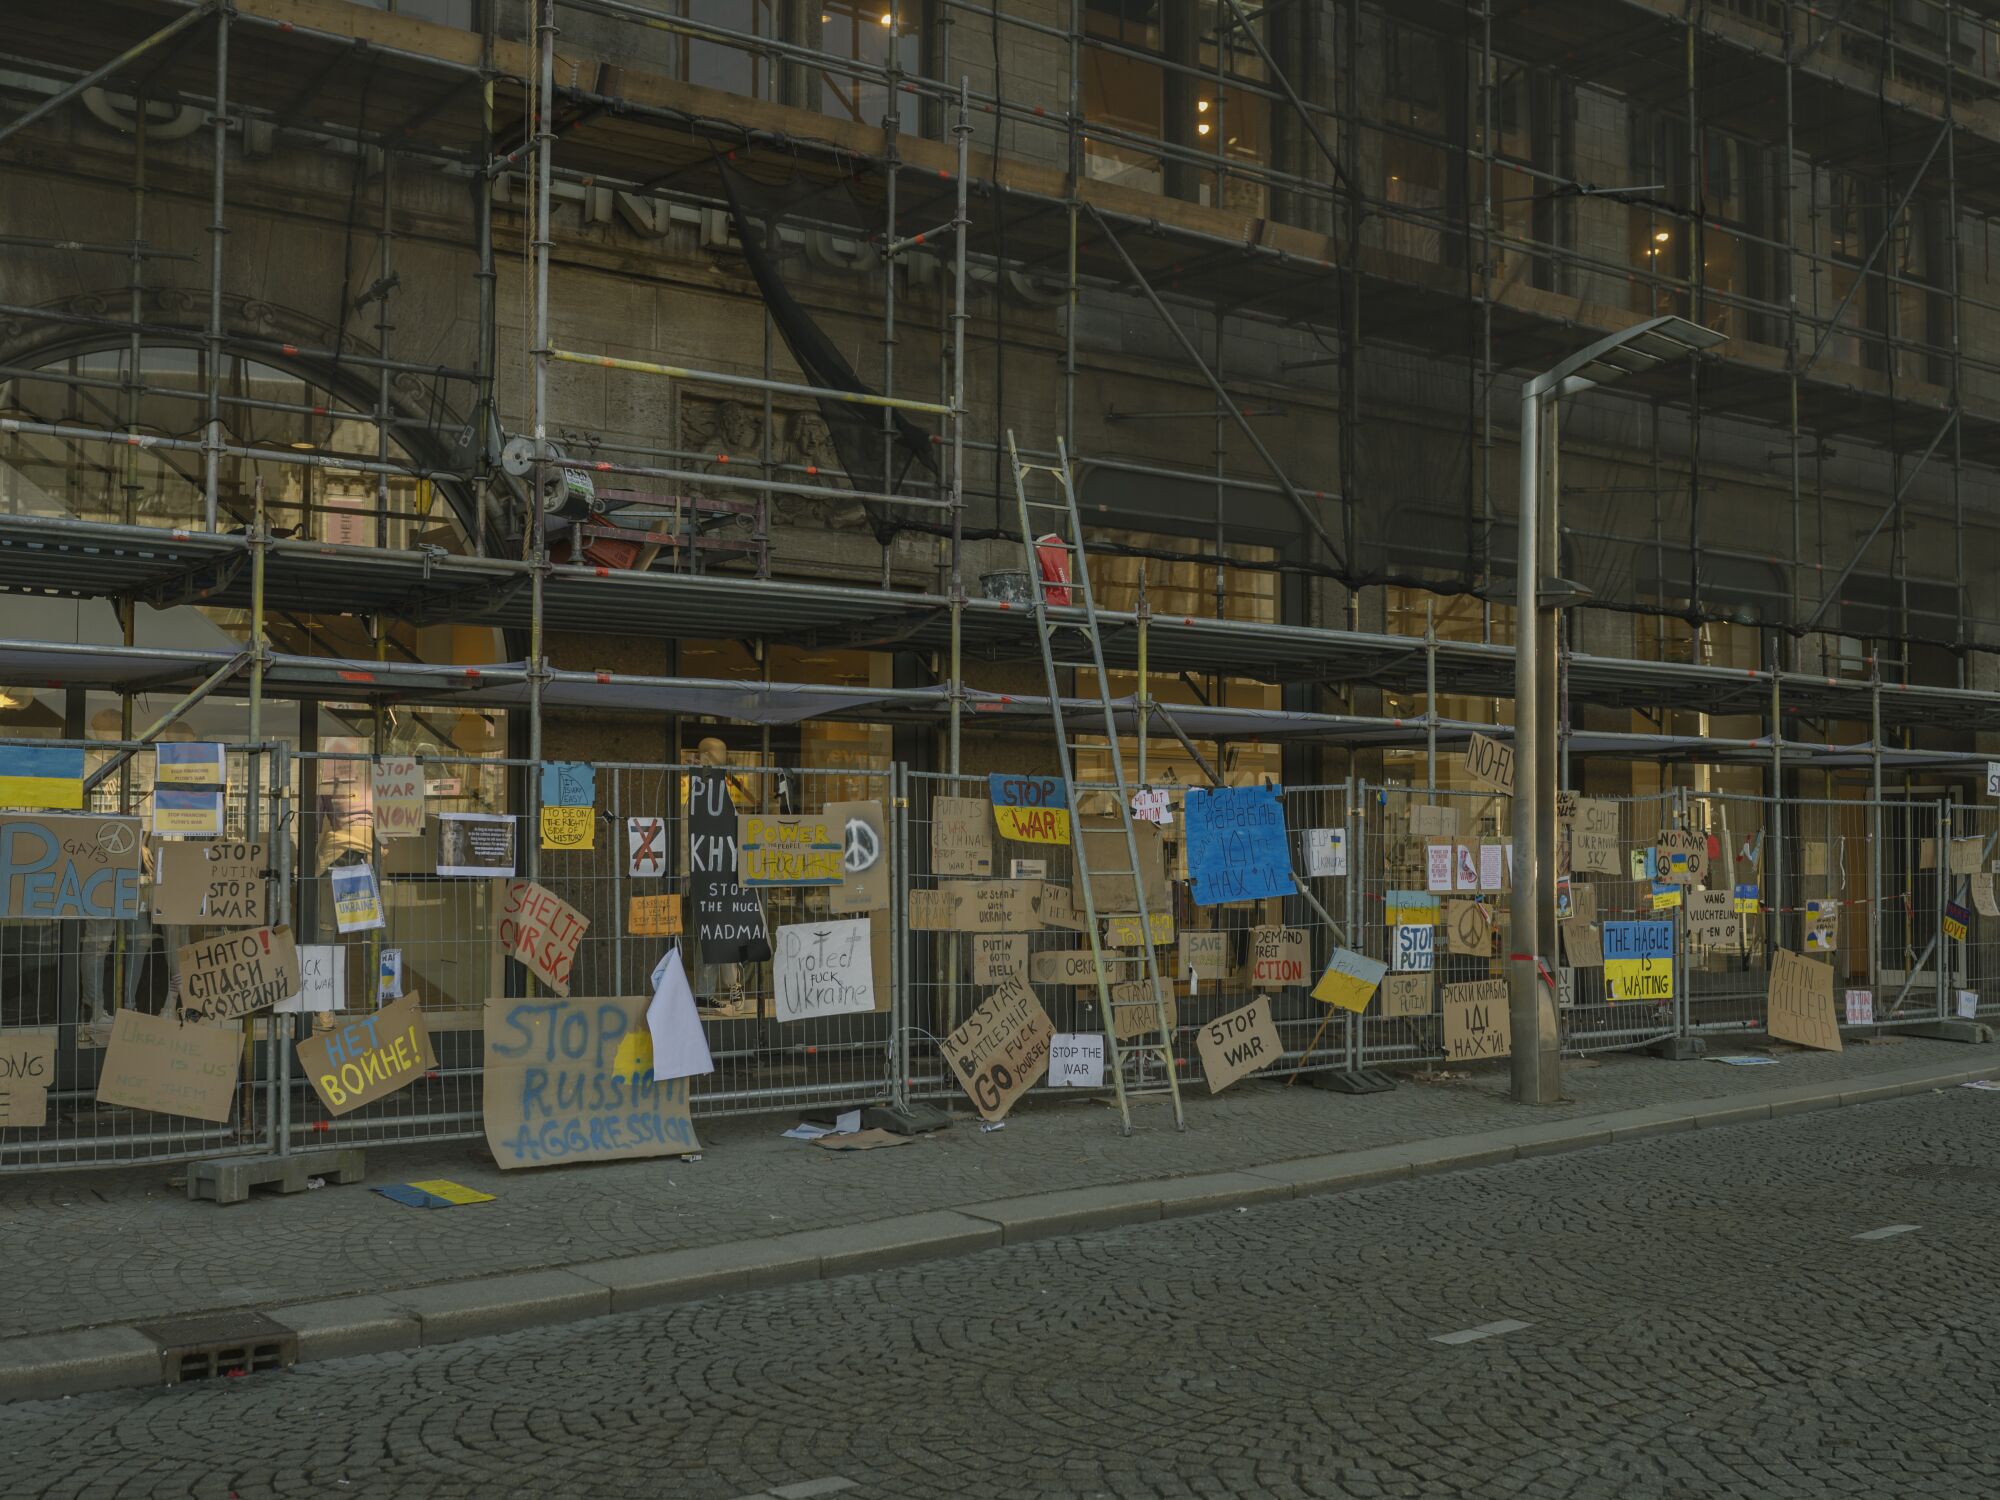 Many cardboard signs are hung on a fence below scaffolding 